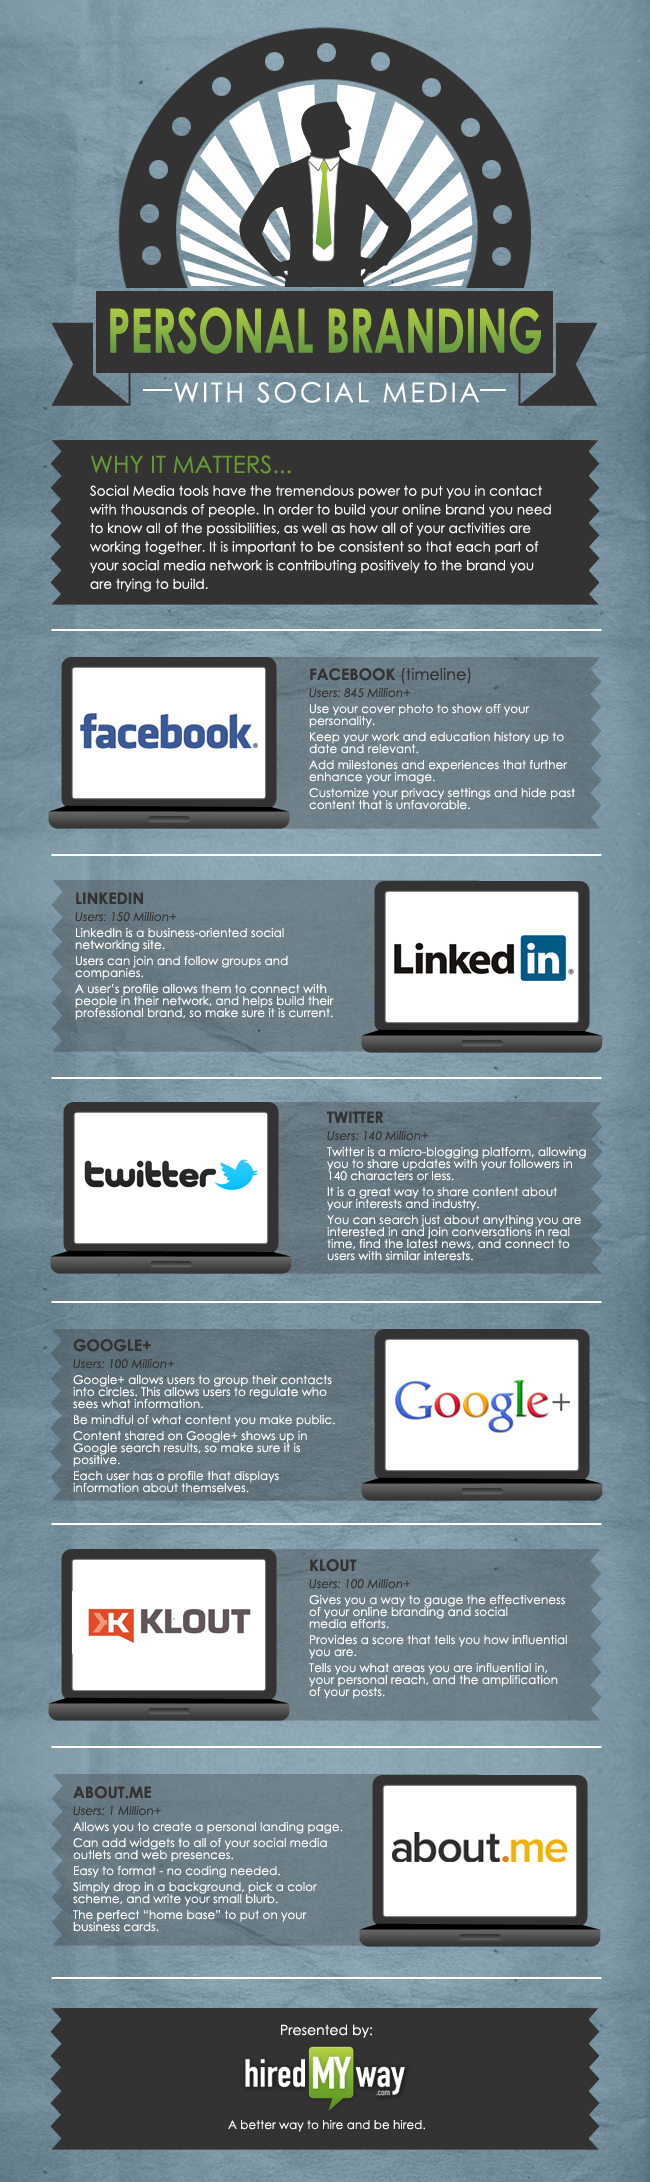 3 Amazing Social Media Infographics Breaking Down the Social Landscape